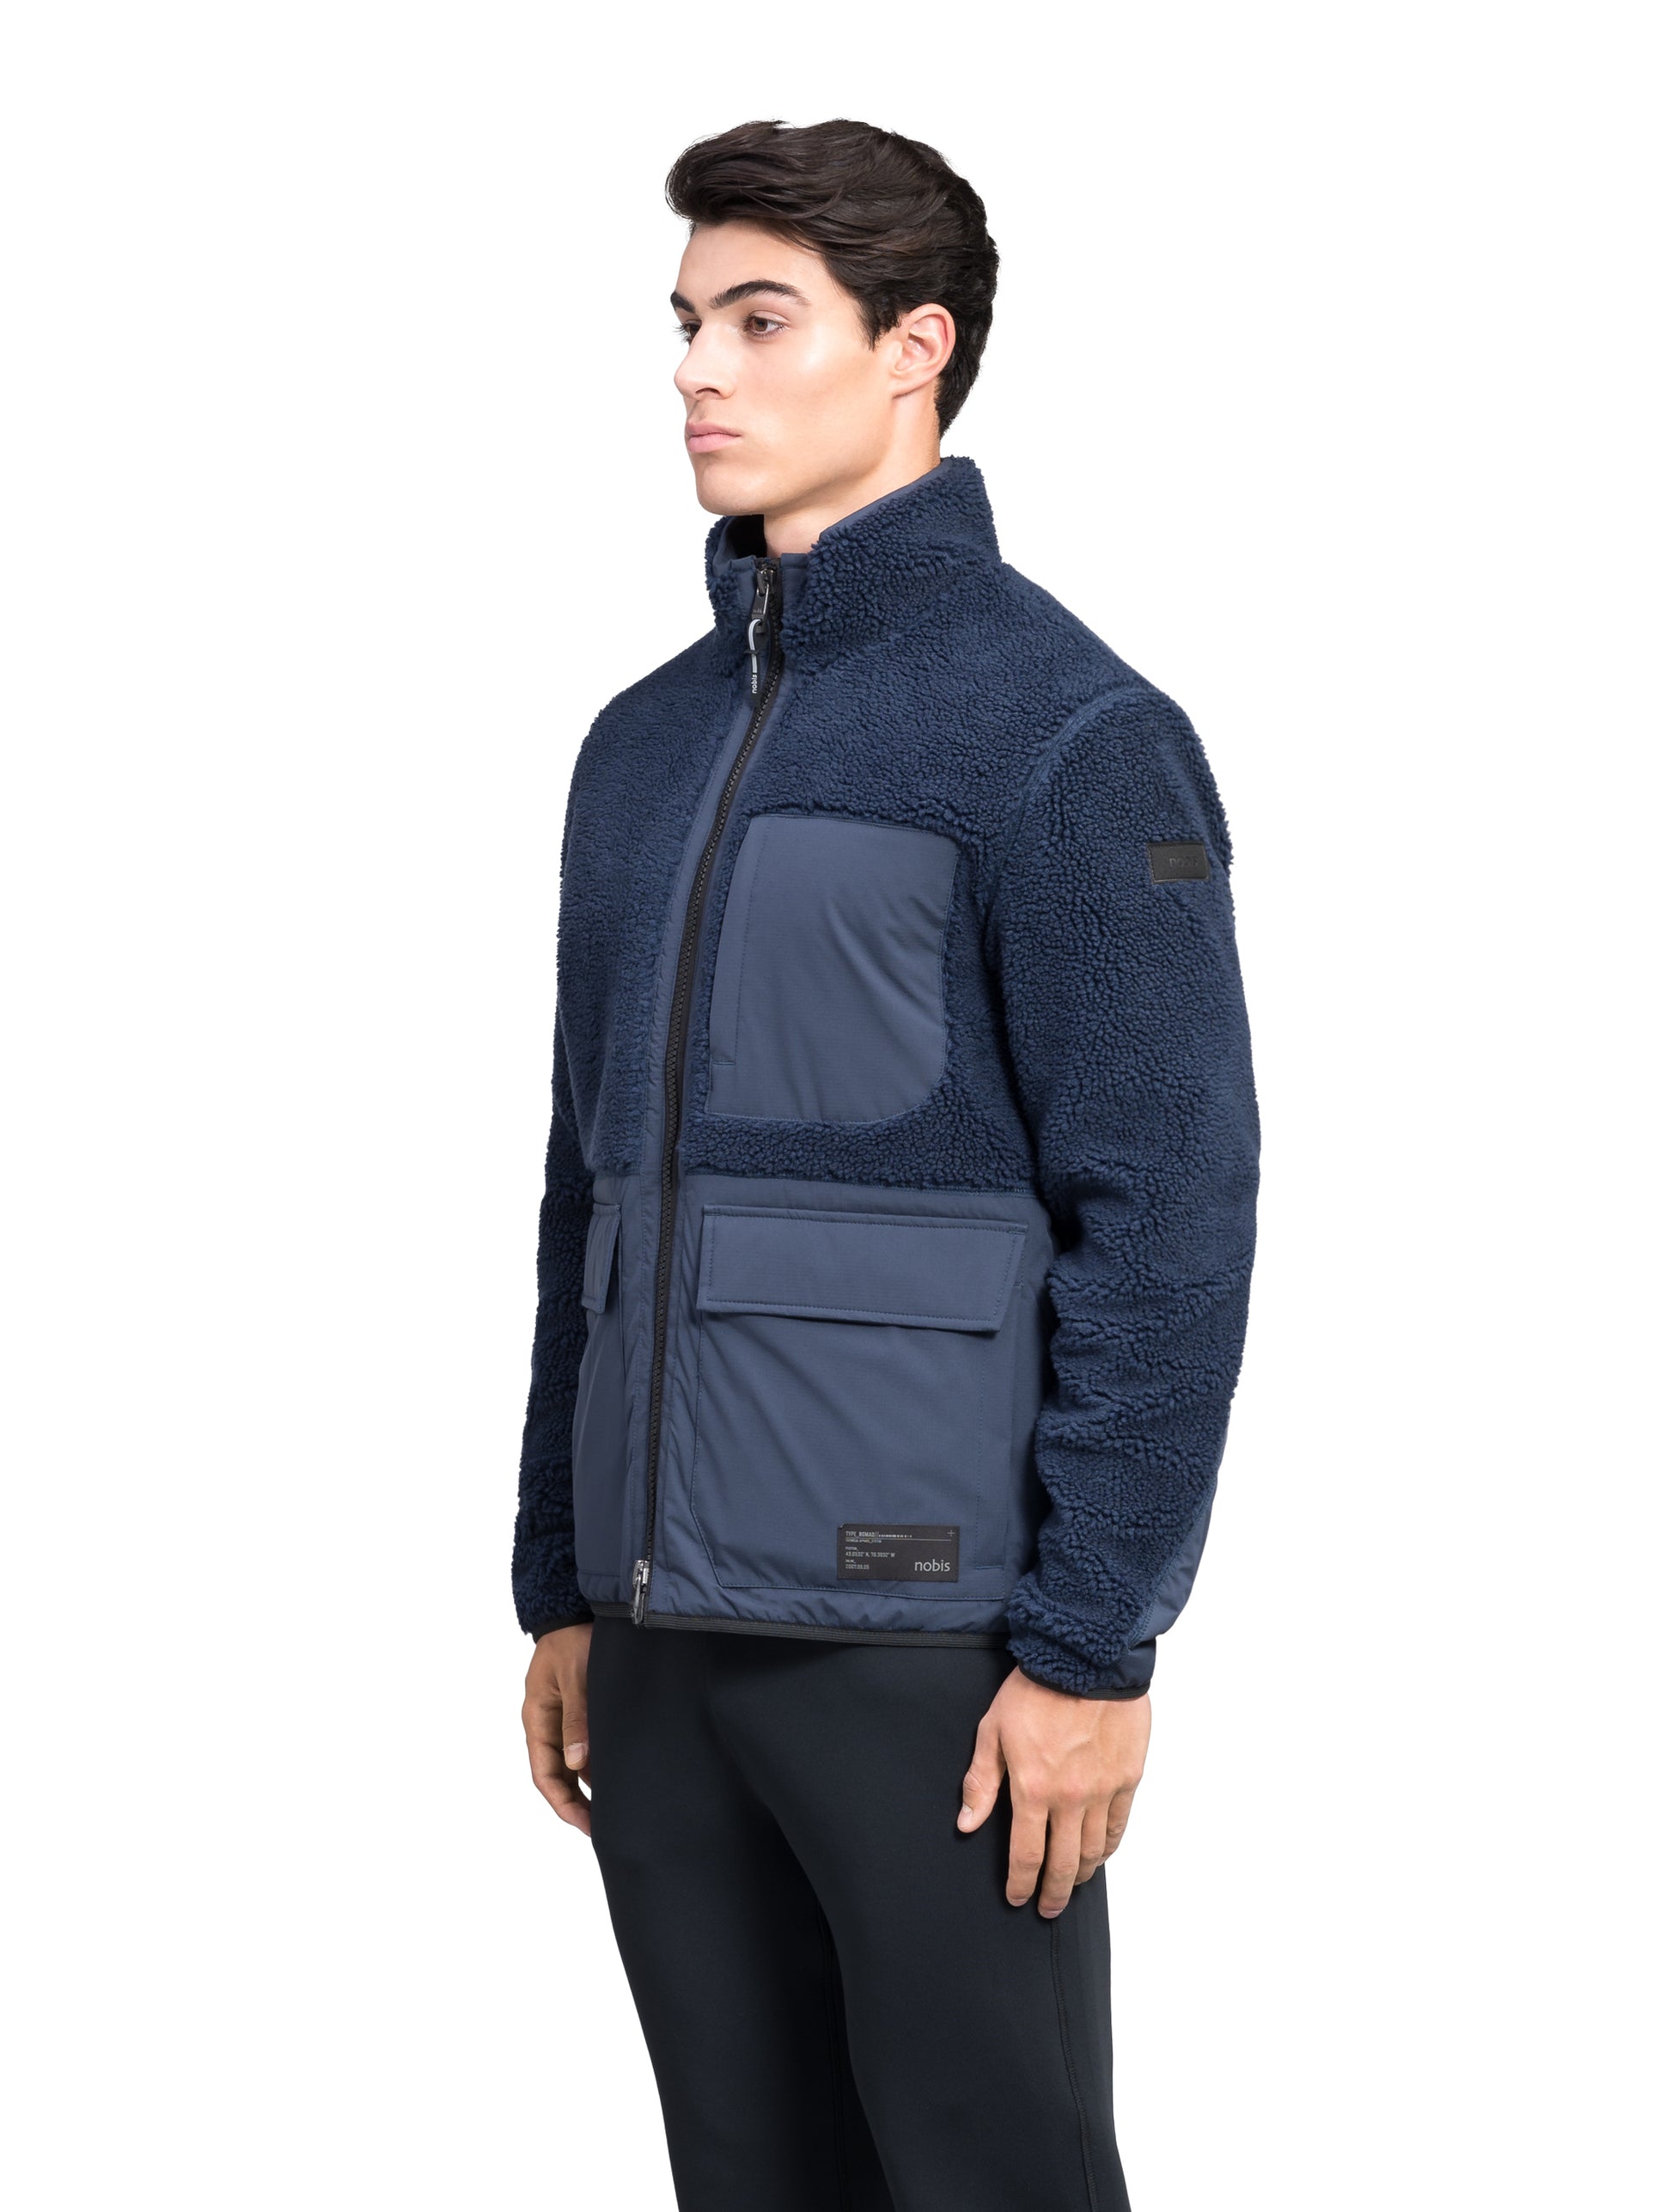 Kepler Men's Berber Zip Front Sweater in hip length, premium berber and stretch ripstop fabrication, Primaloft Gold Insulation Active+, two-way centre-front zipper, zipper pocket at left chest, magnetic closure flap pockets at waist with additional side-entry pockets, in Marine